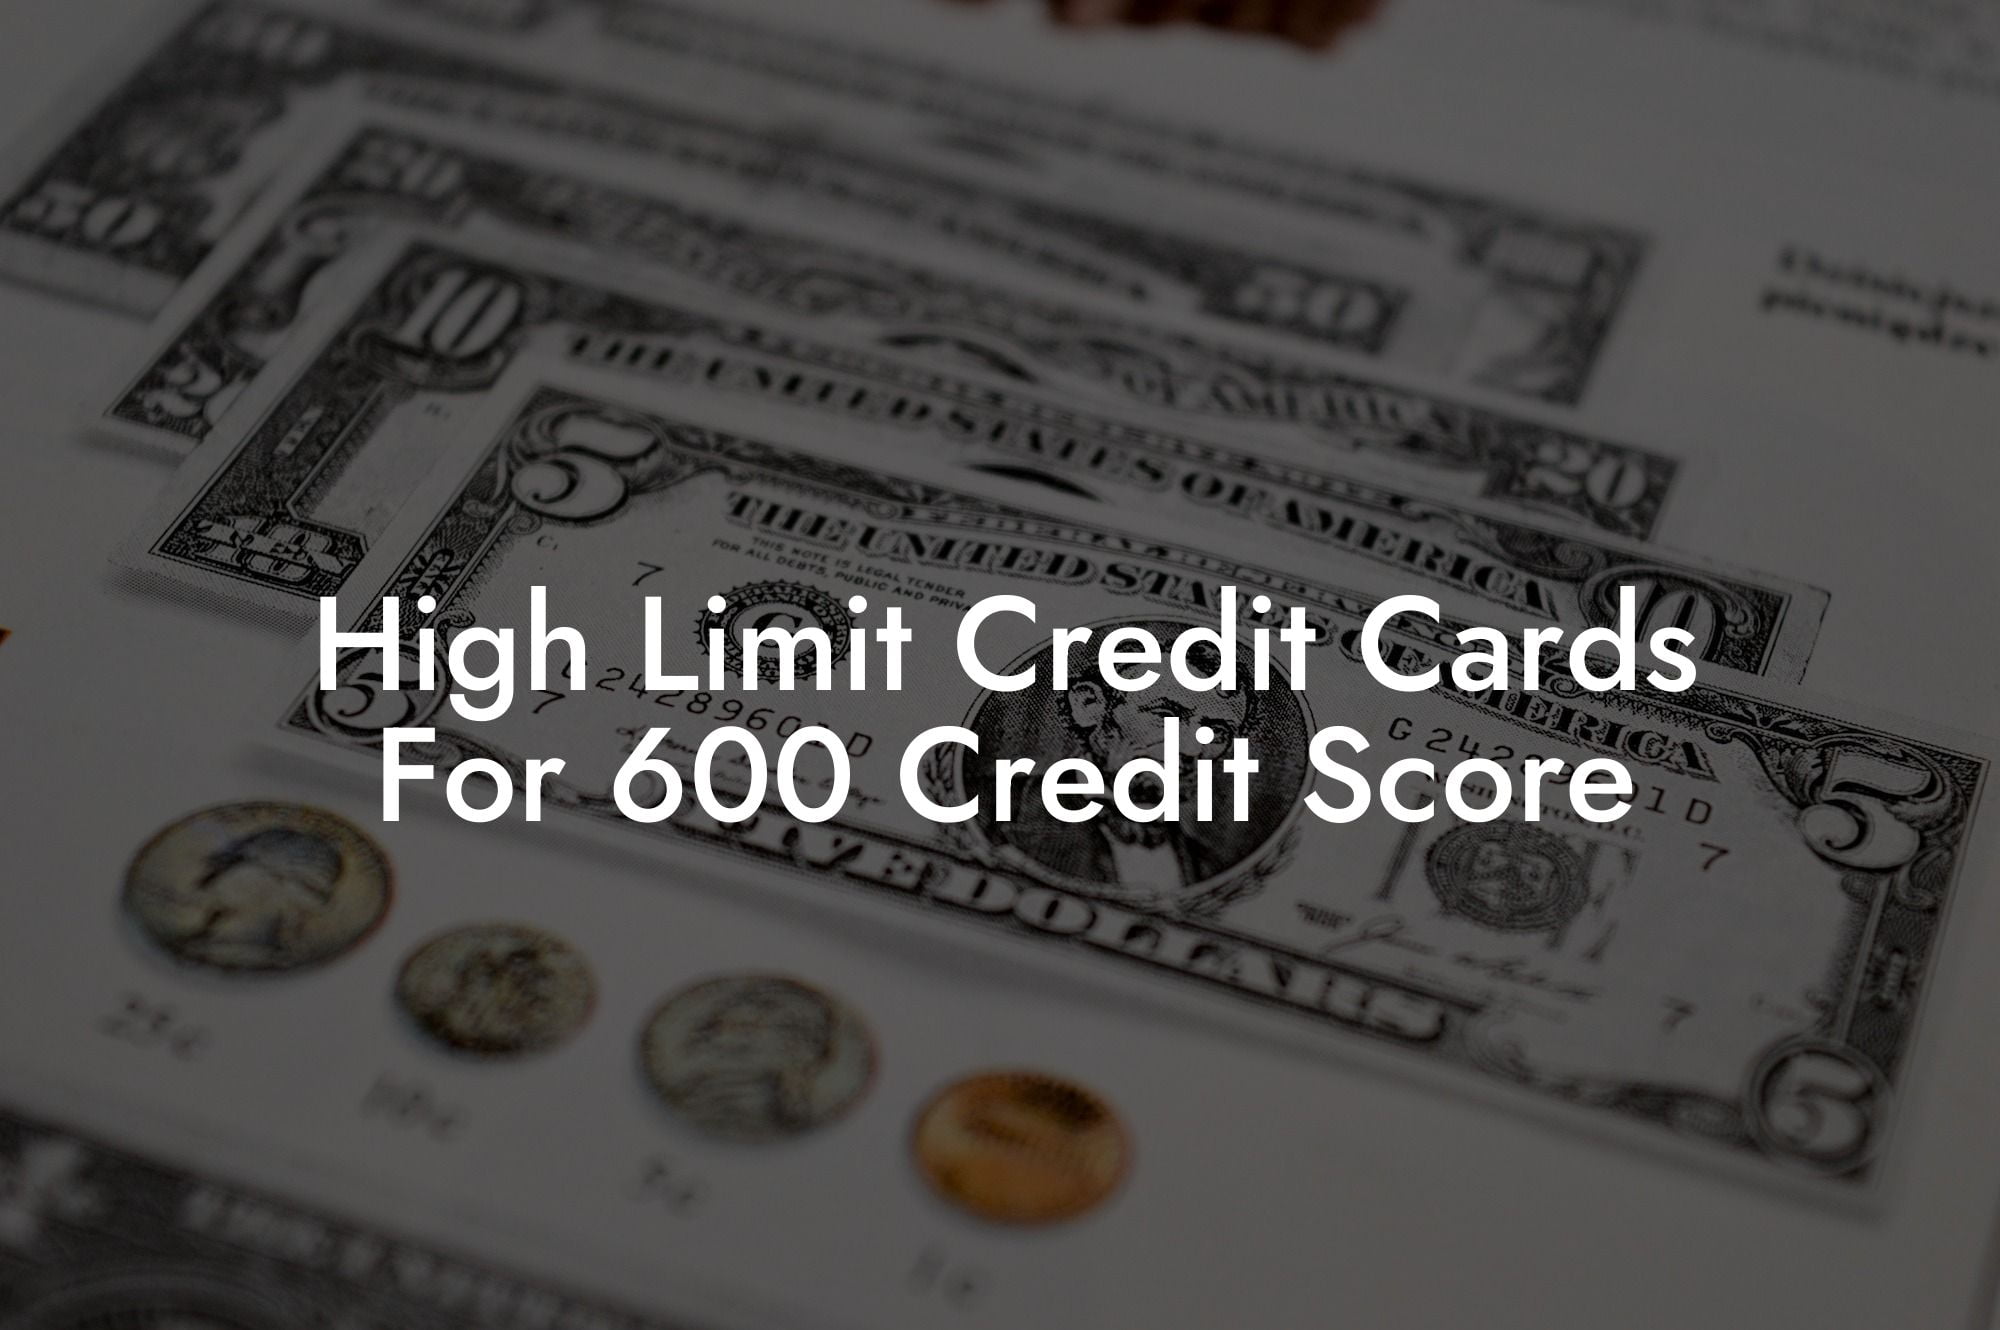 High Limit Credit Cards For 600 Credit Score